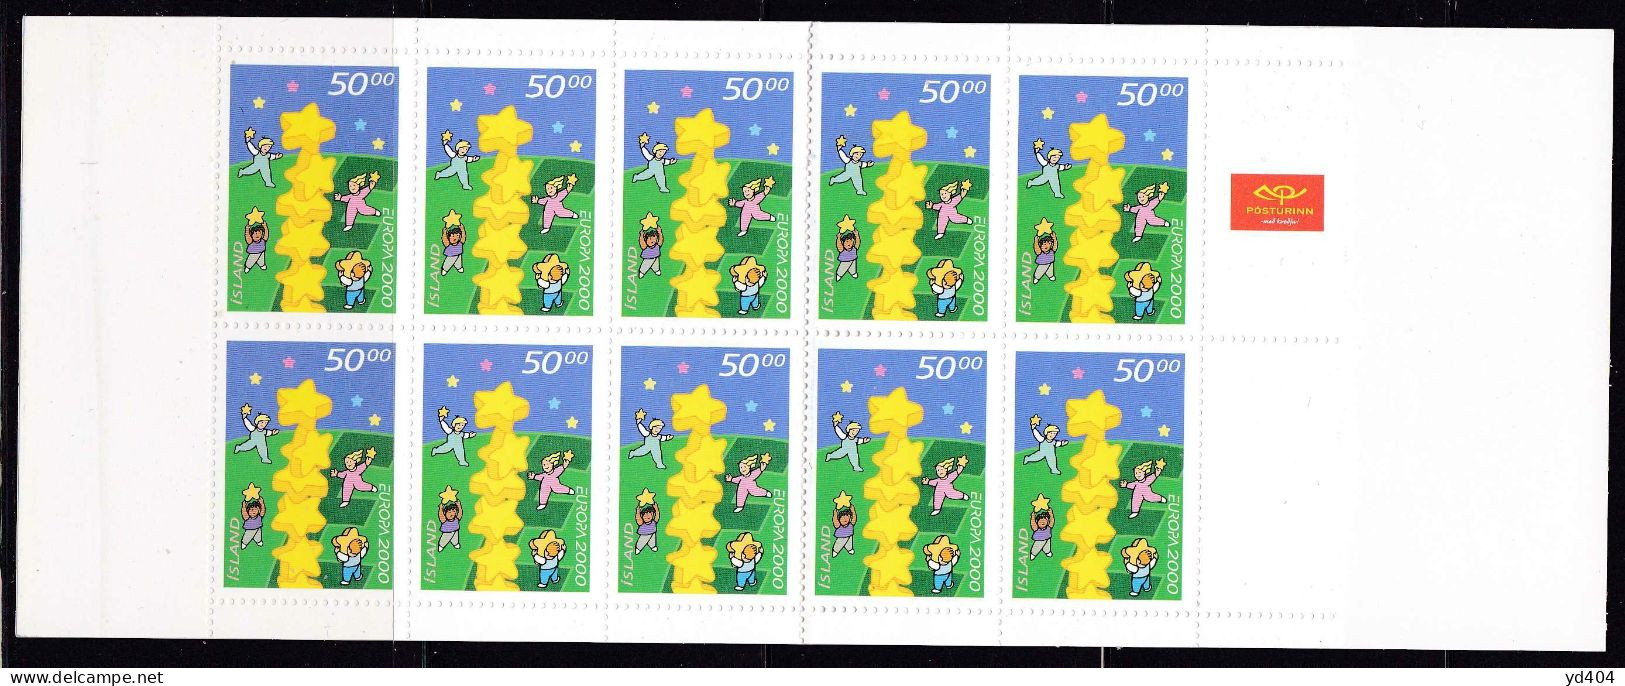 IS674 – ISLANDE - ICELAND - BOOKLETS - 2000 - EUROPA - Y&T # C890 MNH 22 € - Booklets